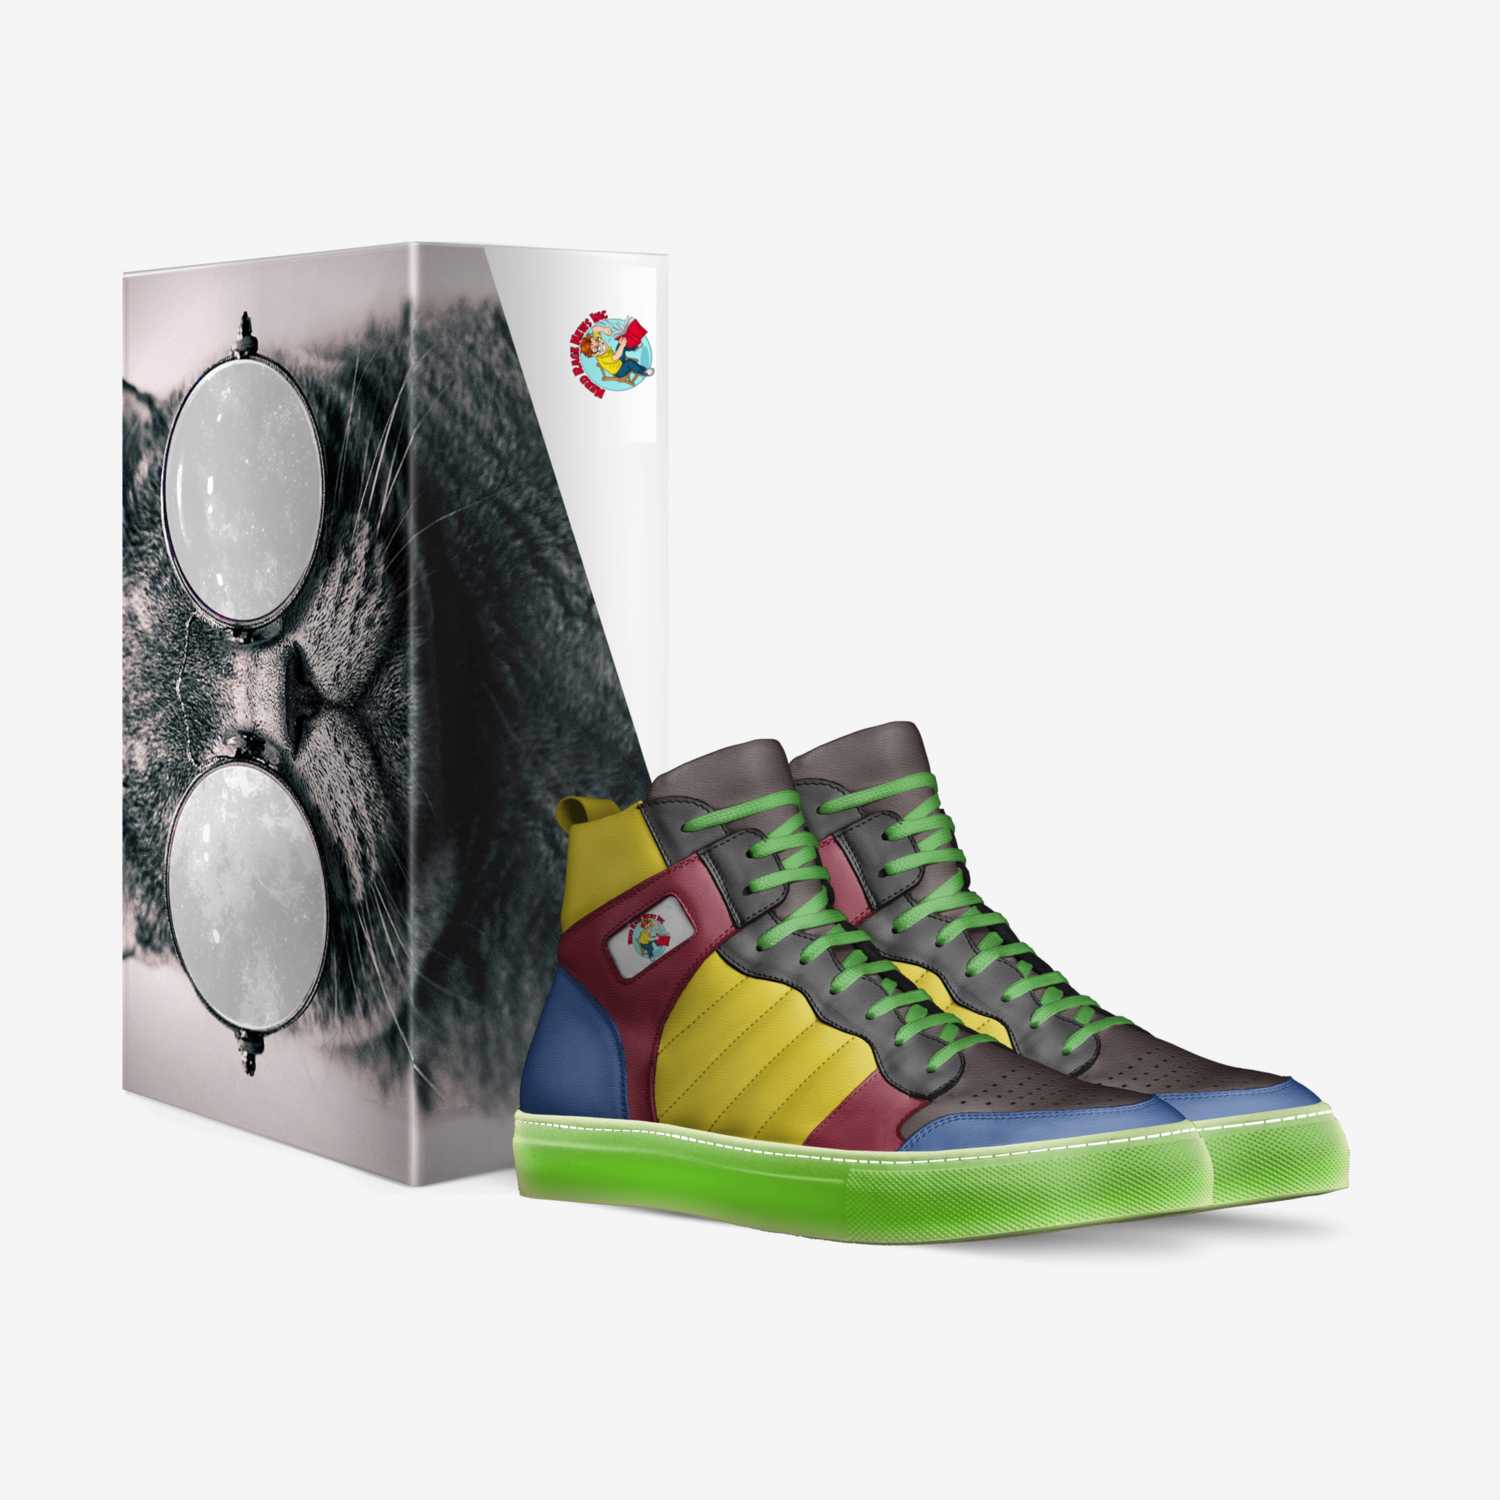 Nerd Prismatic custom made in Italy shoes by Steve Wollett | Box view